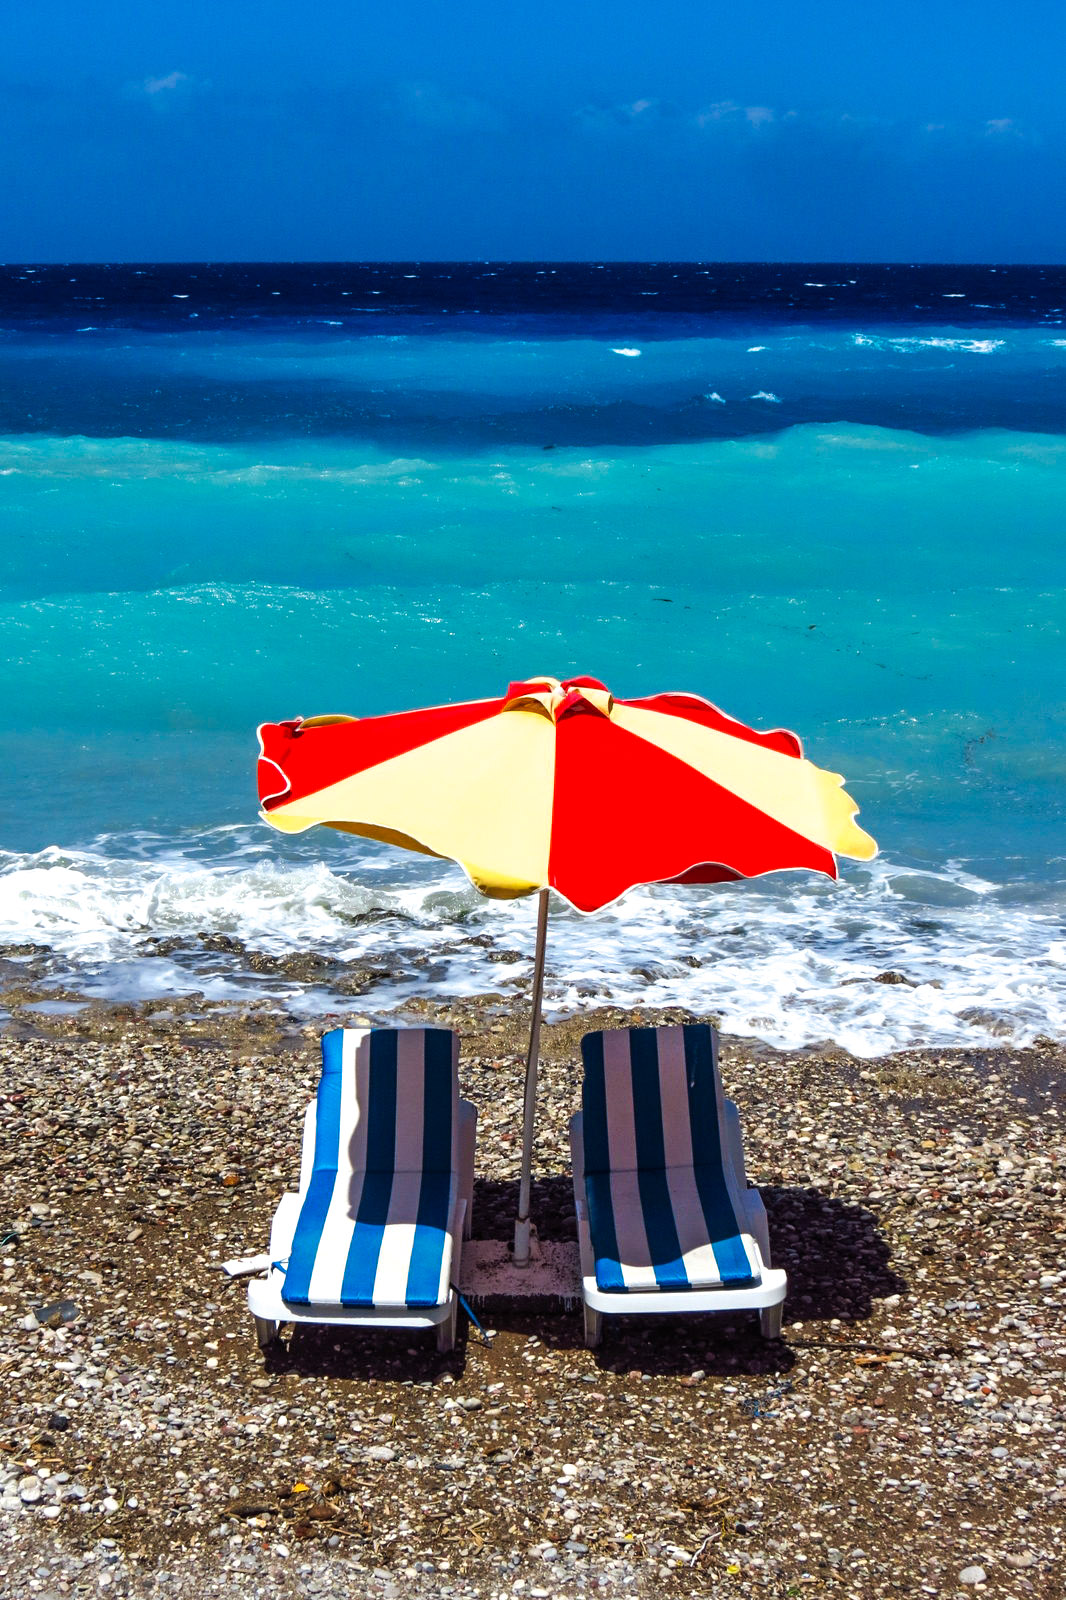 parasol-and-colourfulsea-rhodes